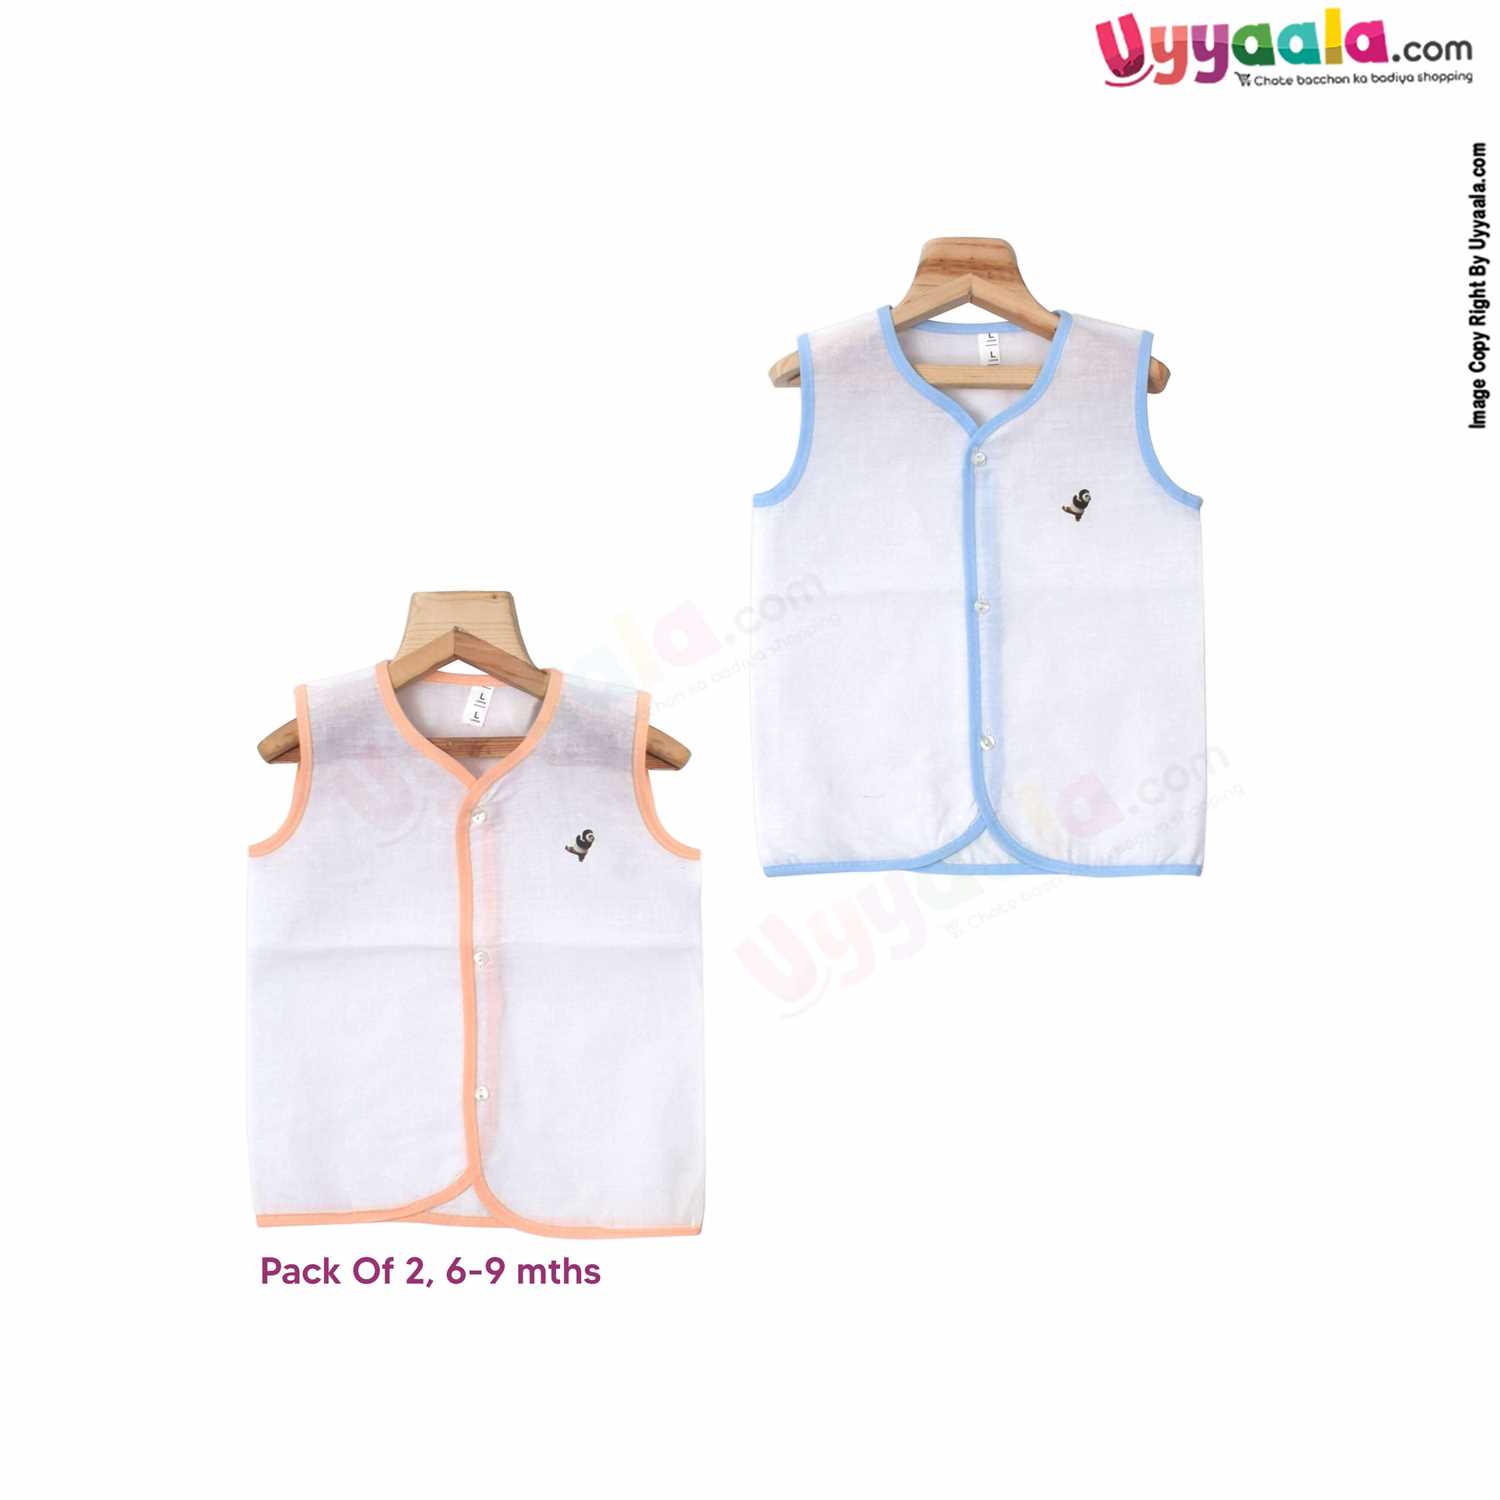 POLAR CUBS Sleeveless Baby Jabla Set, Front Opening Button Model, Premium Quality Cotton Baby Wear, (6-9M), 2Pack - White with Blue & Orange Borders